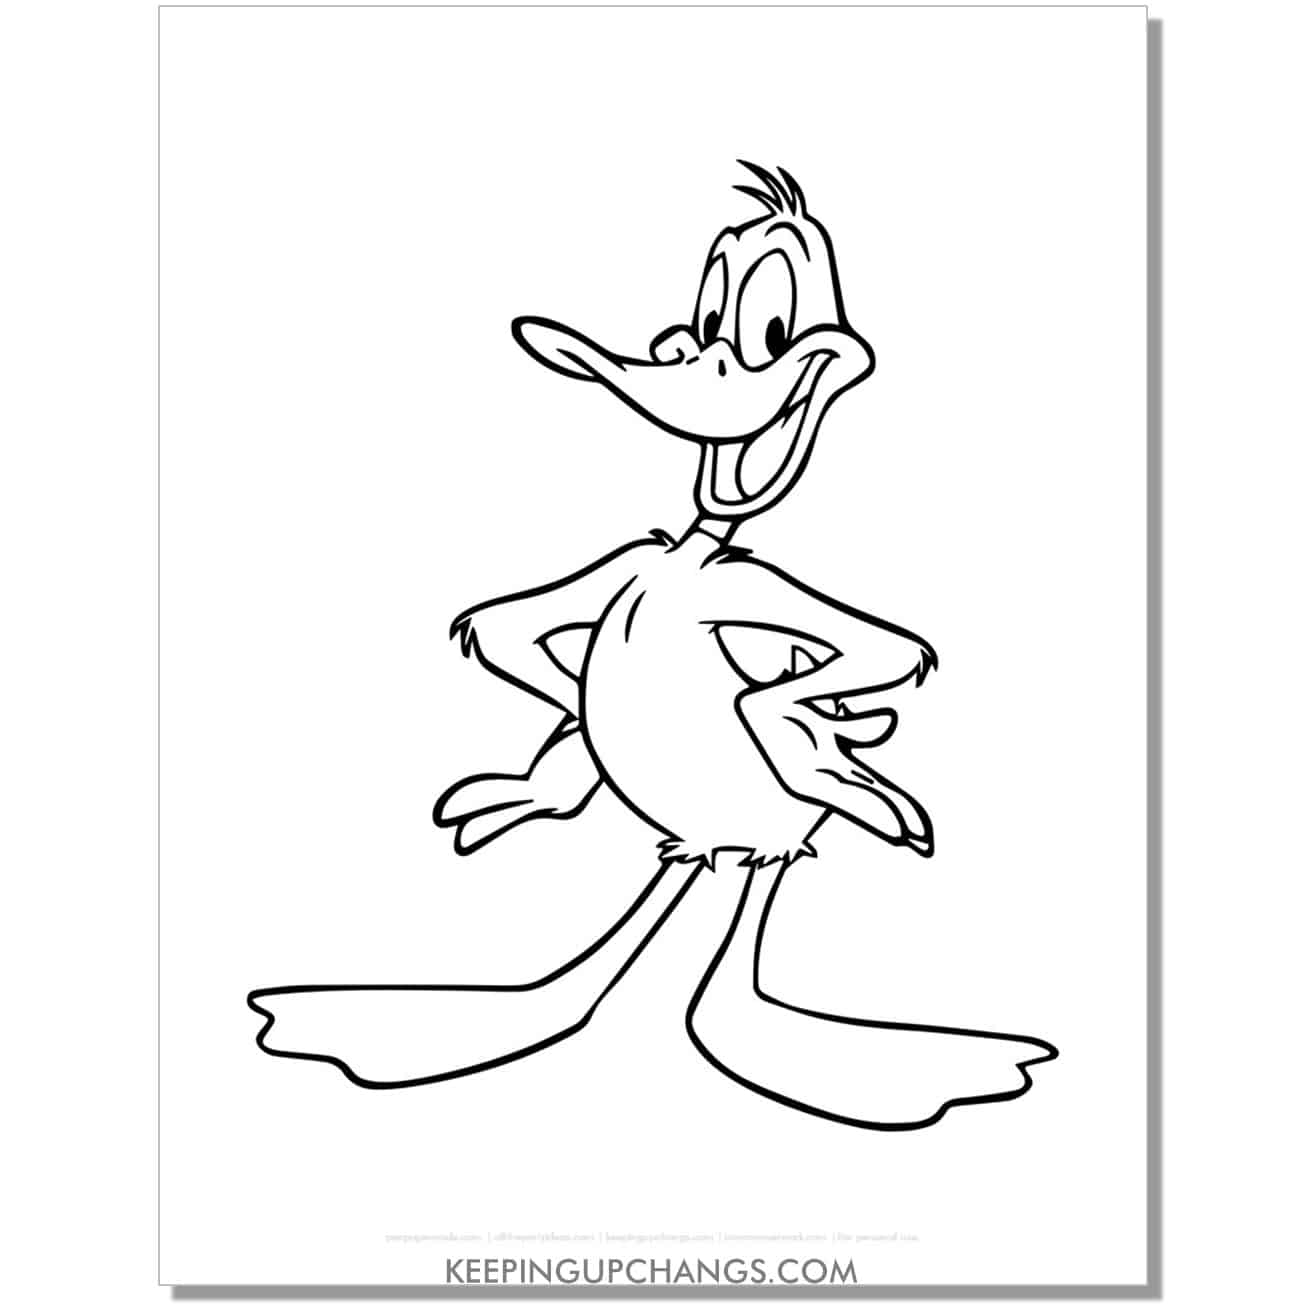 free daffy duck looney tunes coloring page, sheet.